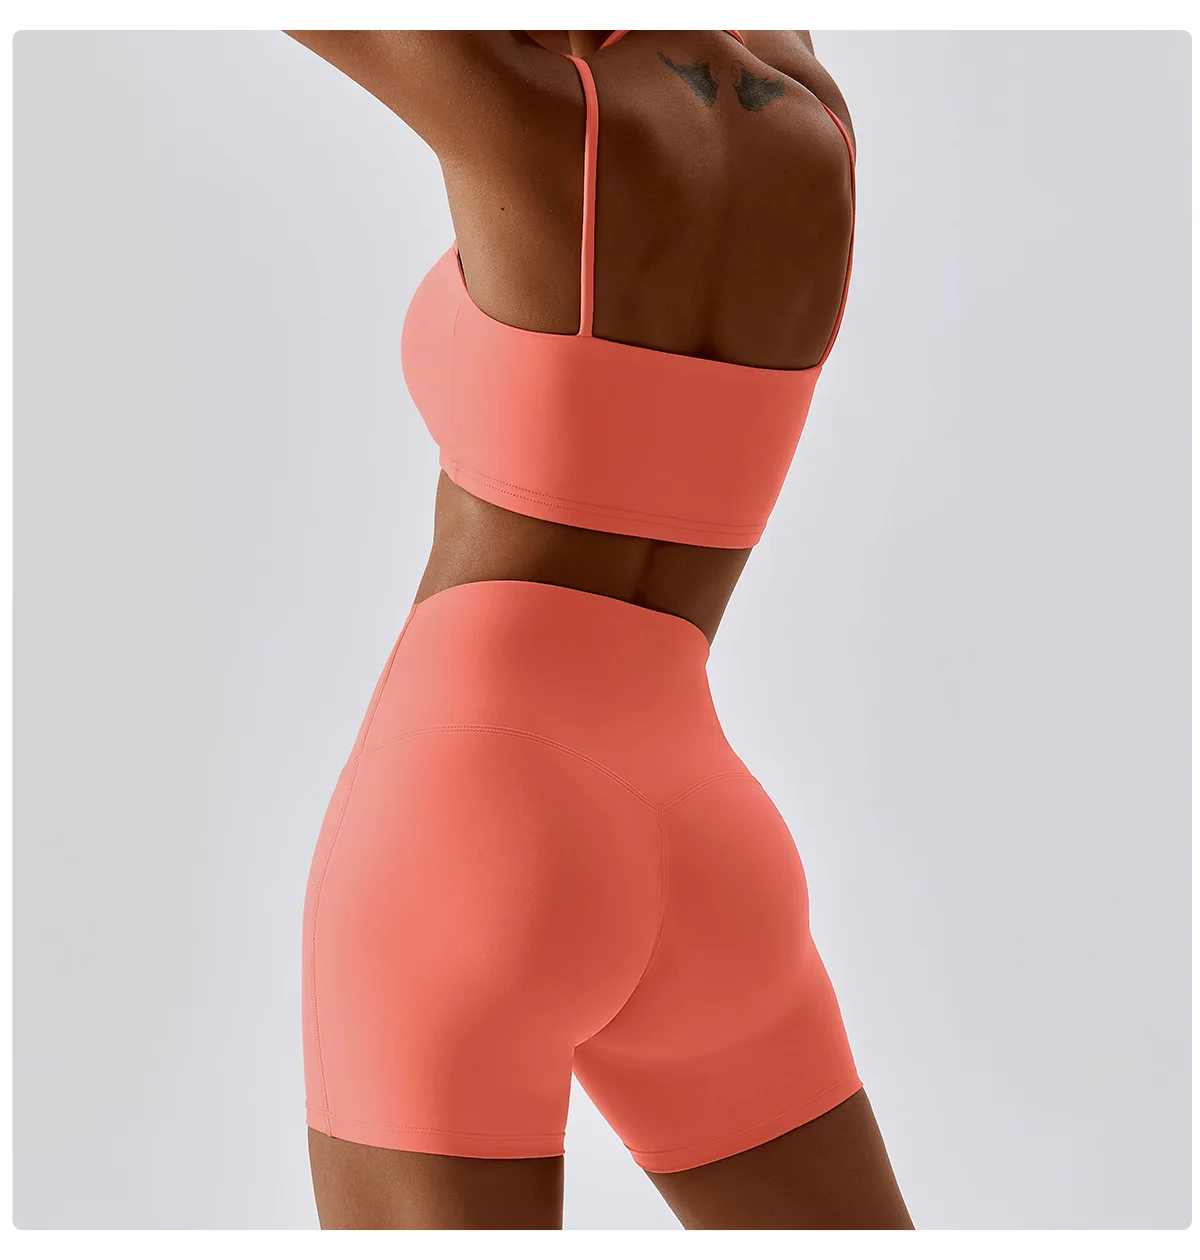 Yoga Clothing Sets Athletic Wear Women High Waist Leggings And Top Two Piece Set Seamless Gym Tracksuit Fitness Workout Outfits -S0ad489f51f38449496ef37aad8852116l